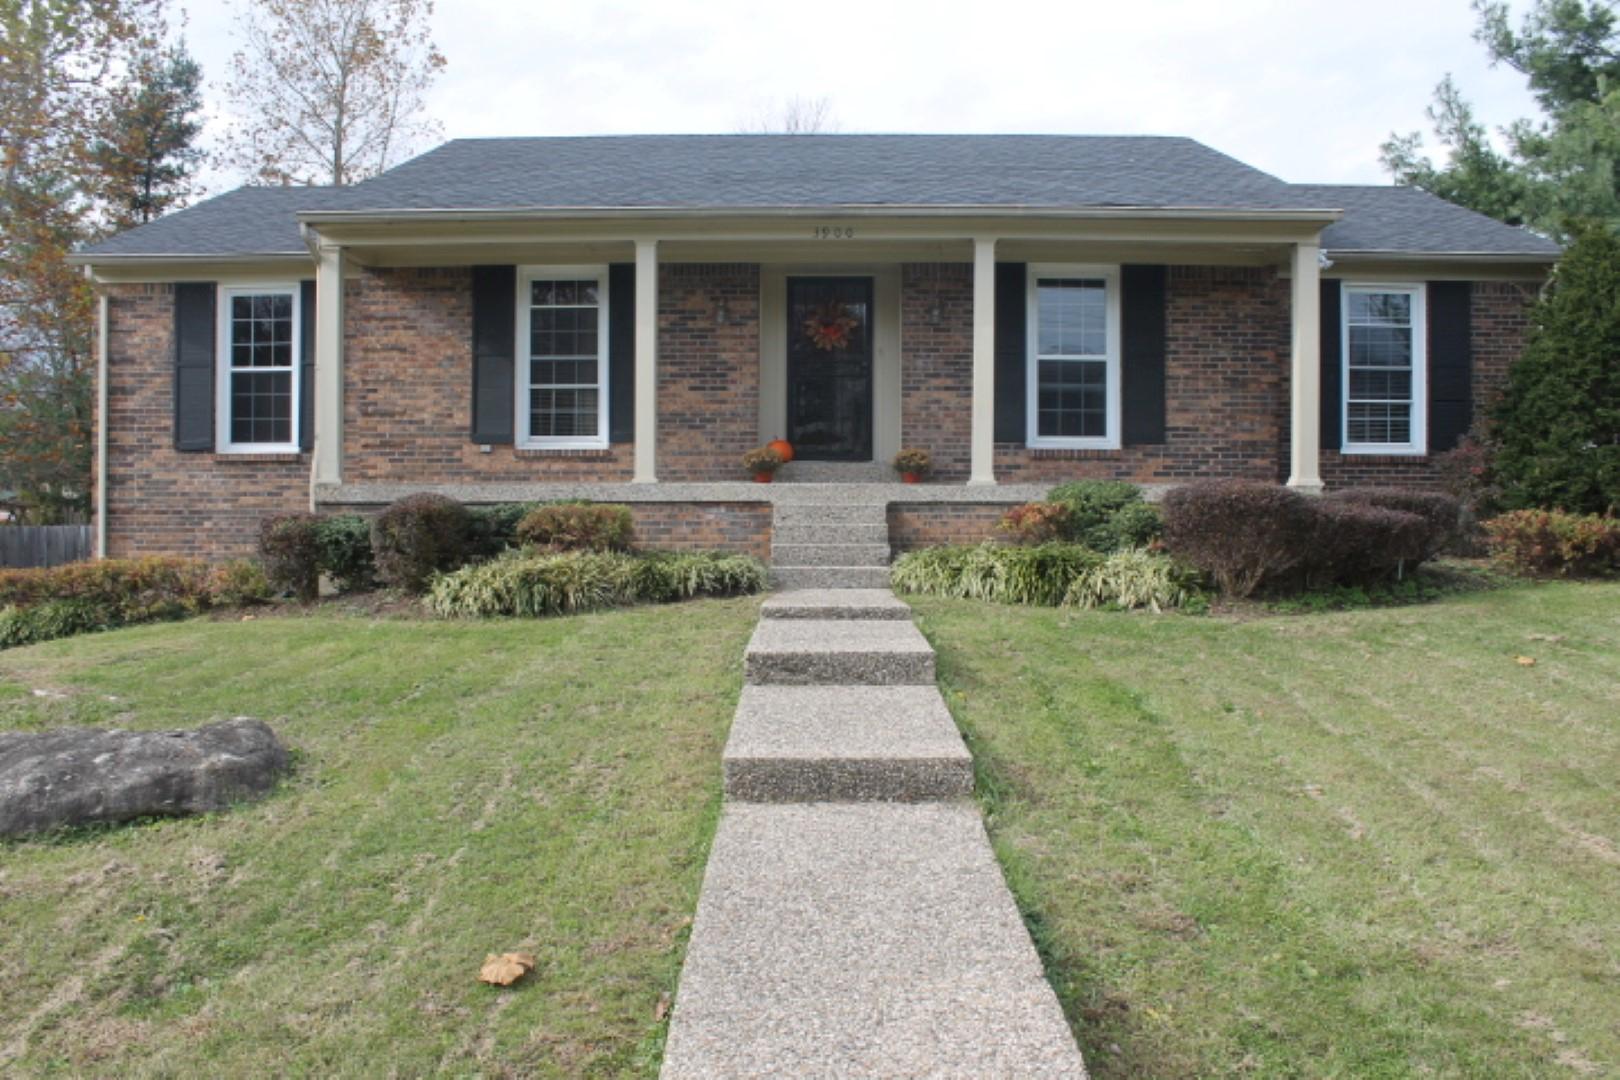 Just Listed - This 3 BR / 3 BA home in the Bristol Oaks subdivision of Jeffersontown needs a little TLC, but has tons of potential.  With a flexible floorplan, partially finished basement, custom tile work, covered patio space, and large corner lot, there is a lot to start with.  